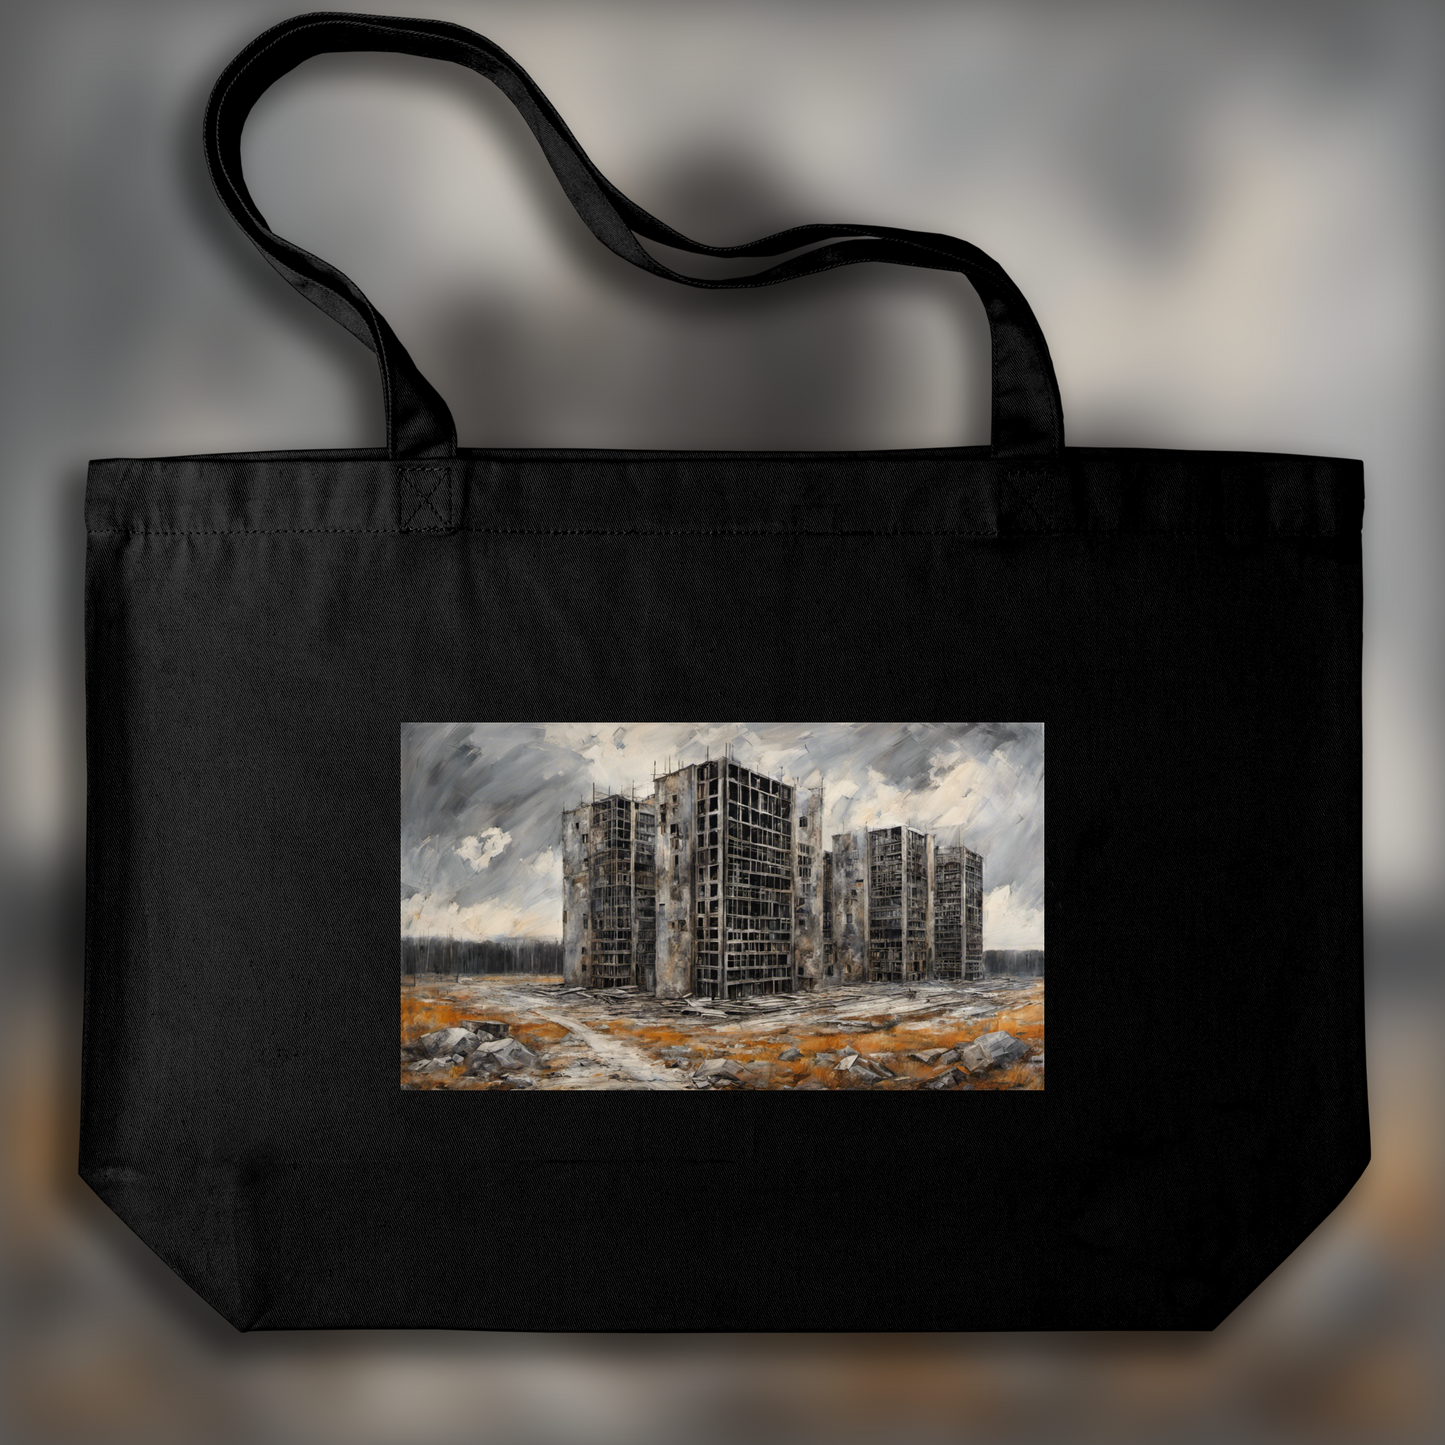 Tote bag - Contemporary German neo-expressonism, Brutalist architecture, city - 1621212597